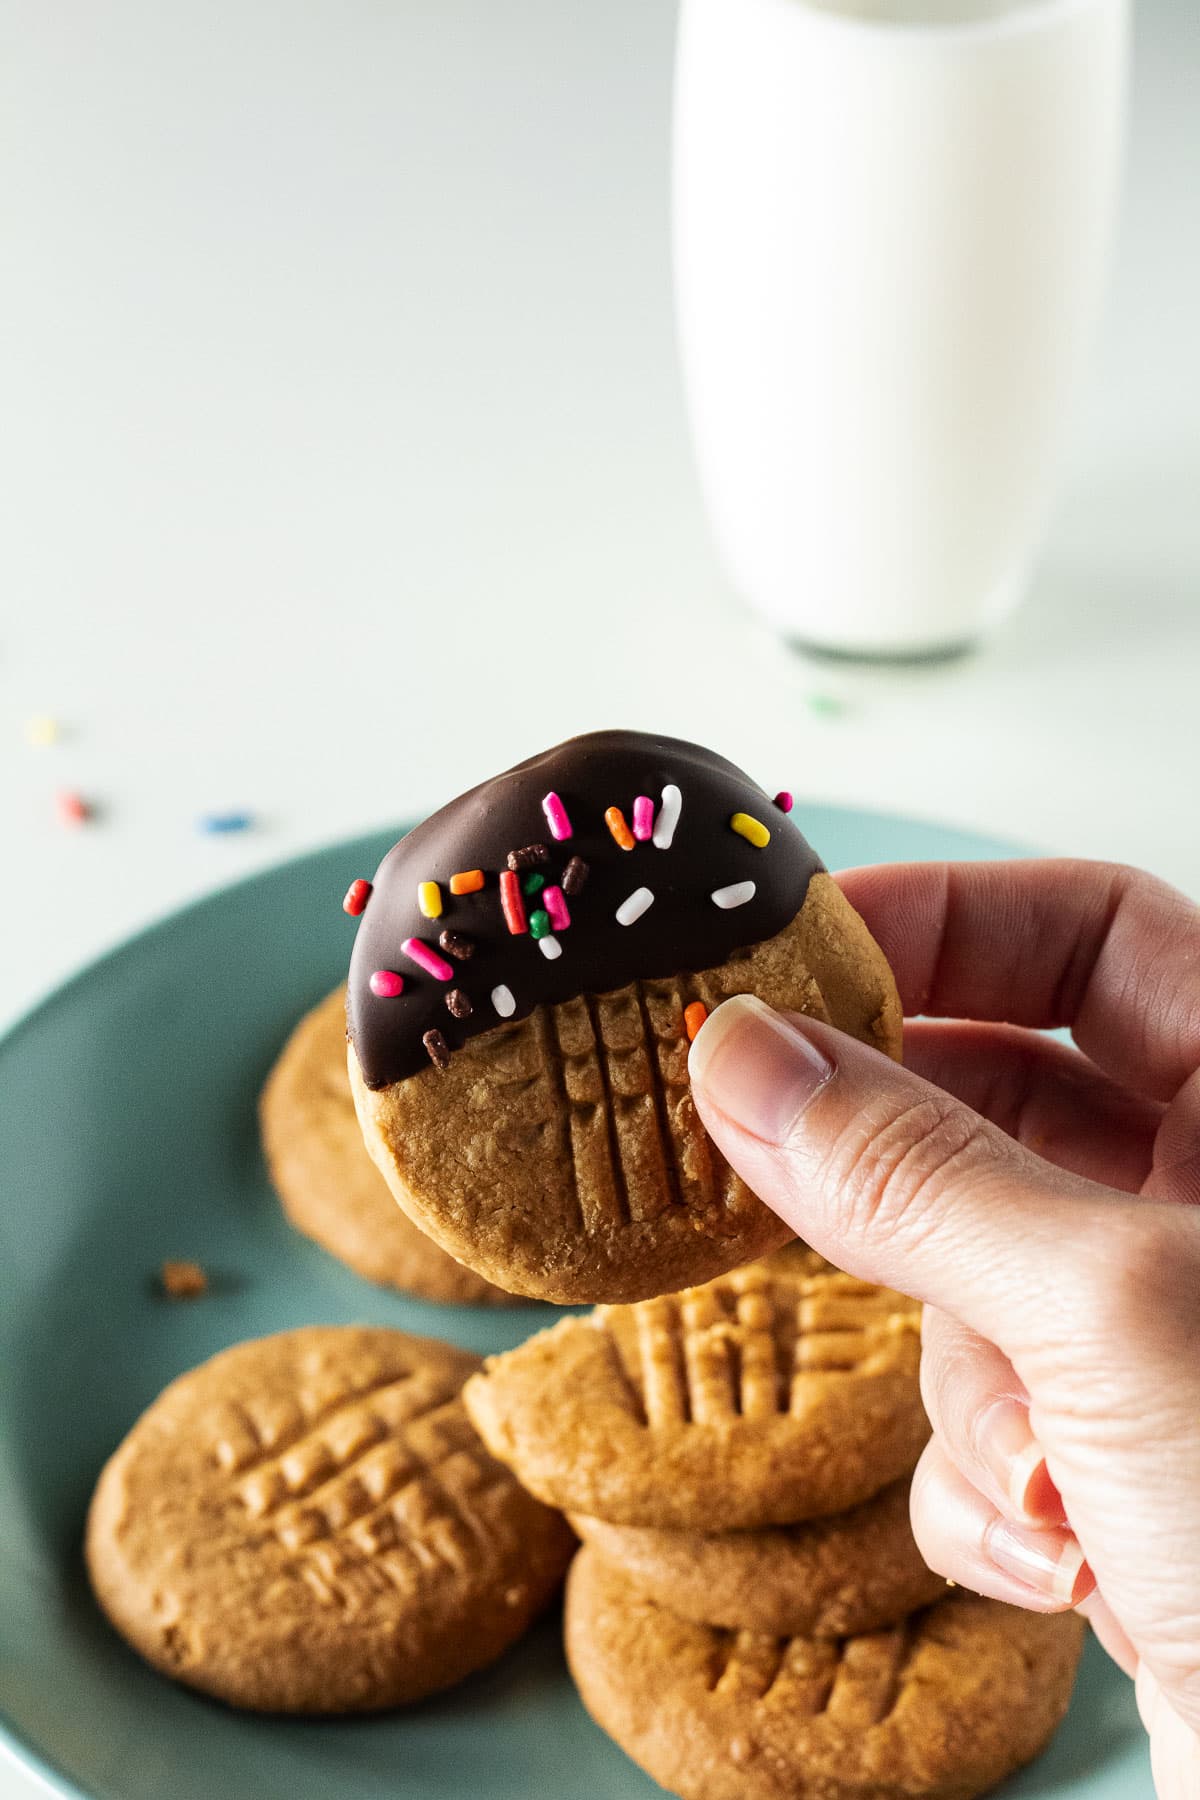 Hand holding a 2 ingredient peanut butter cookie dipped in chocolate.